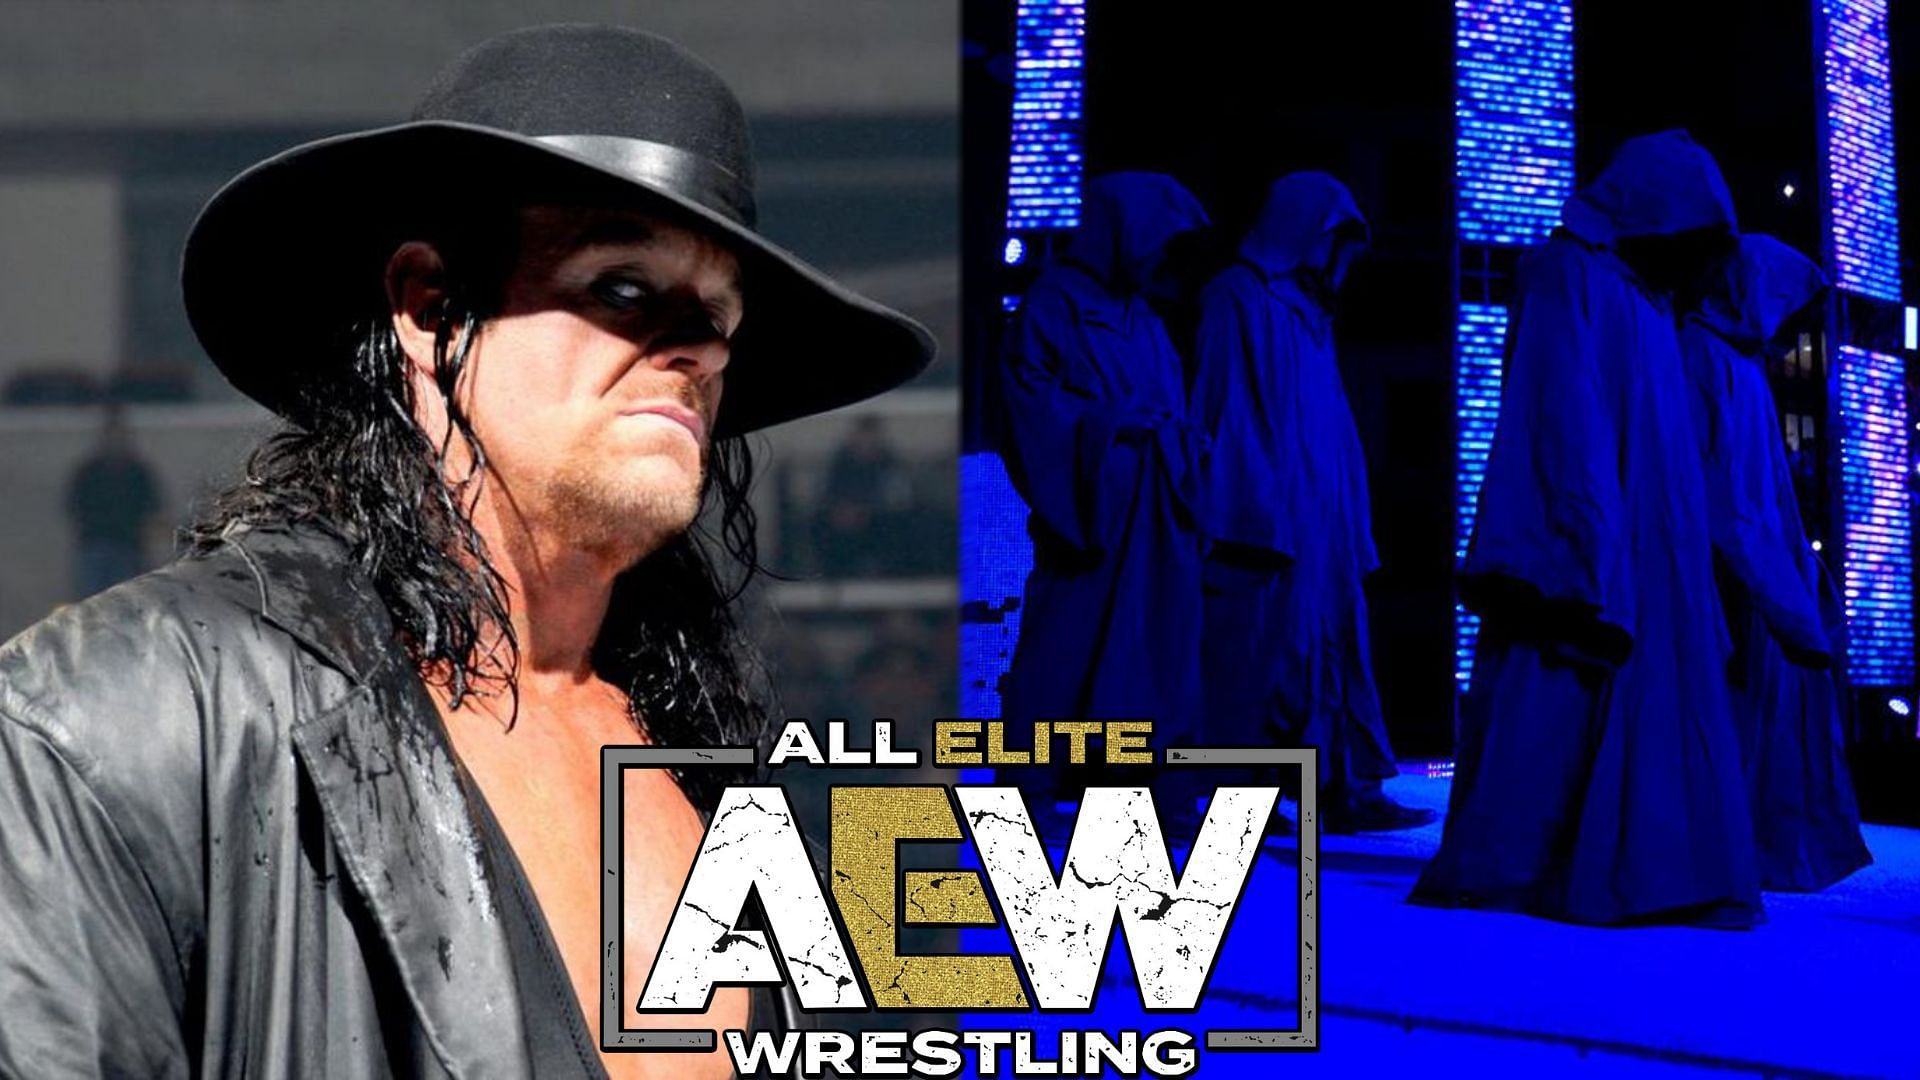 The Undertaker has paved the way for many wrestlers into the industry.